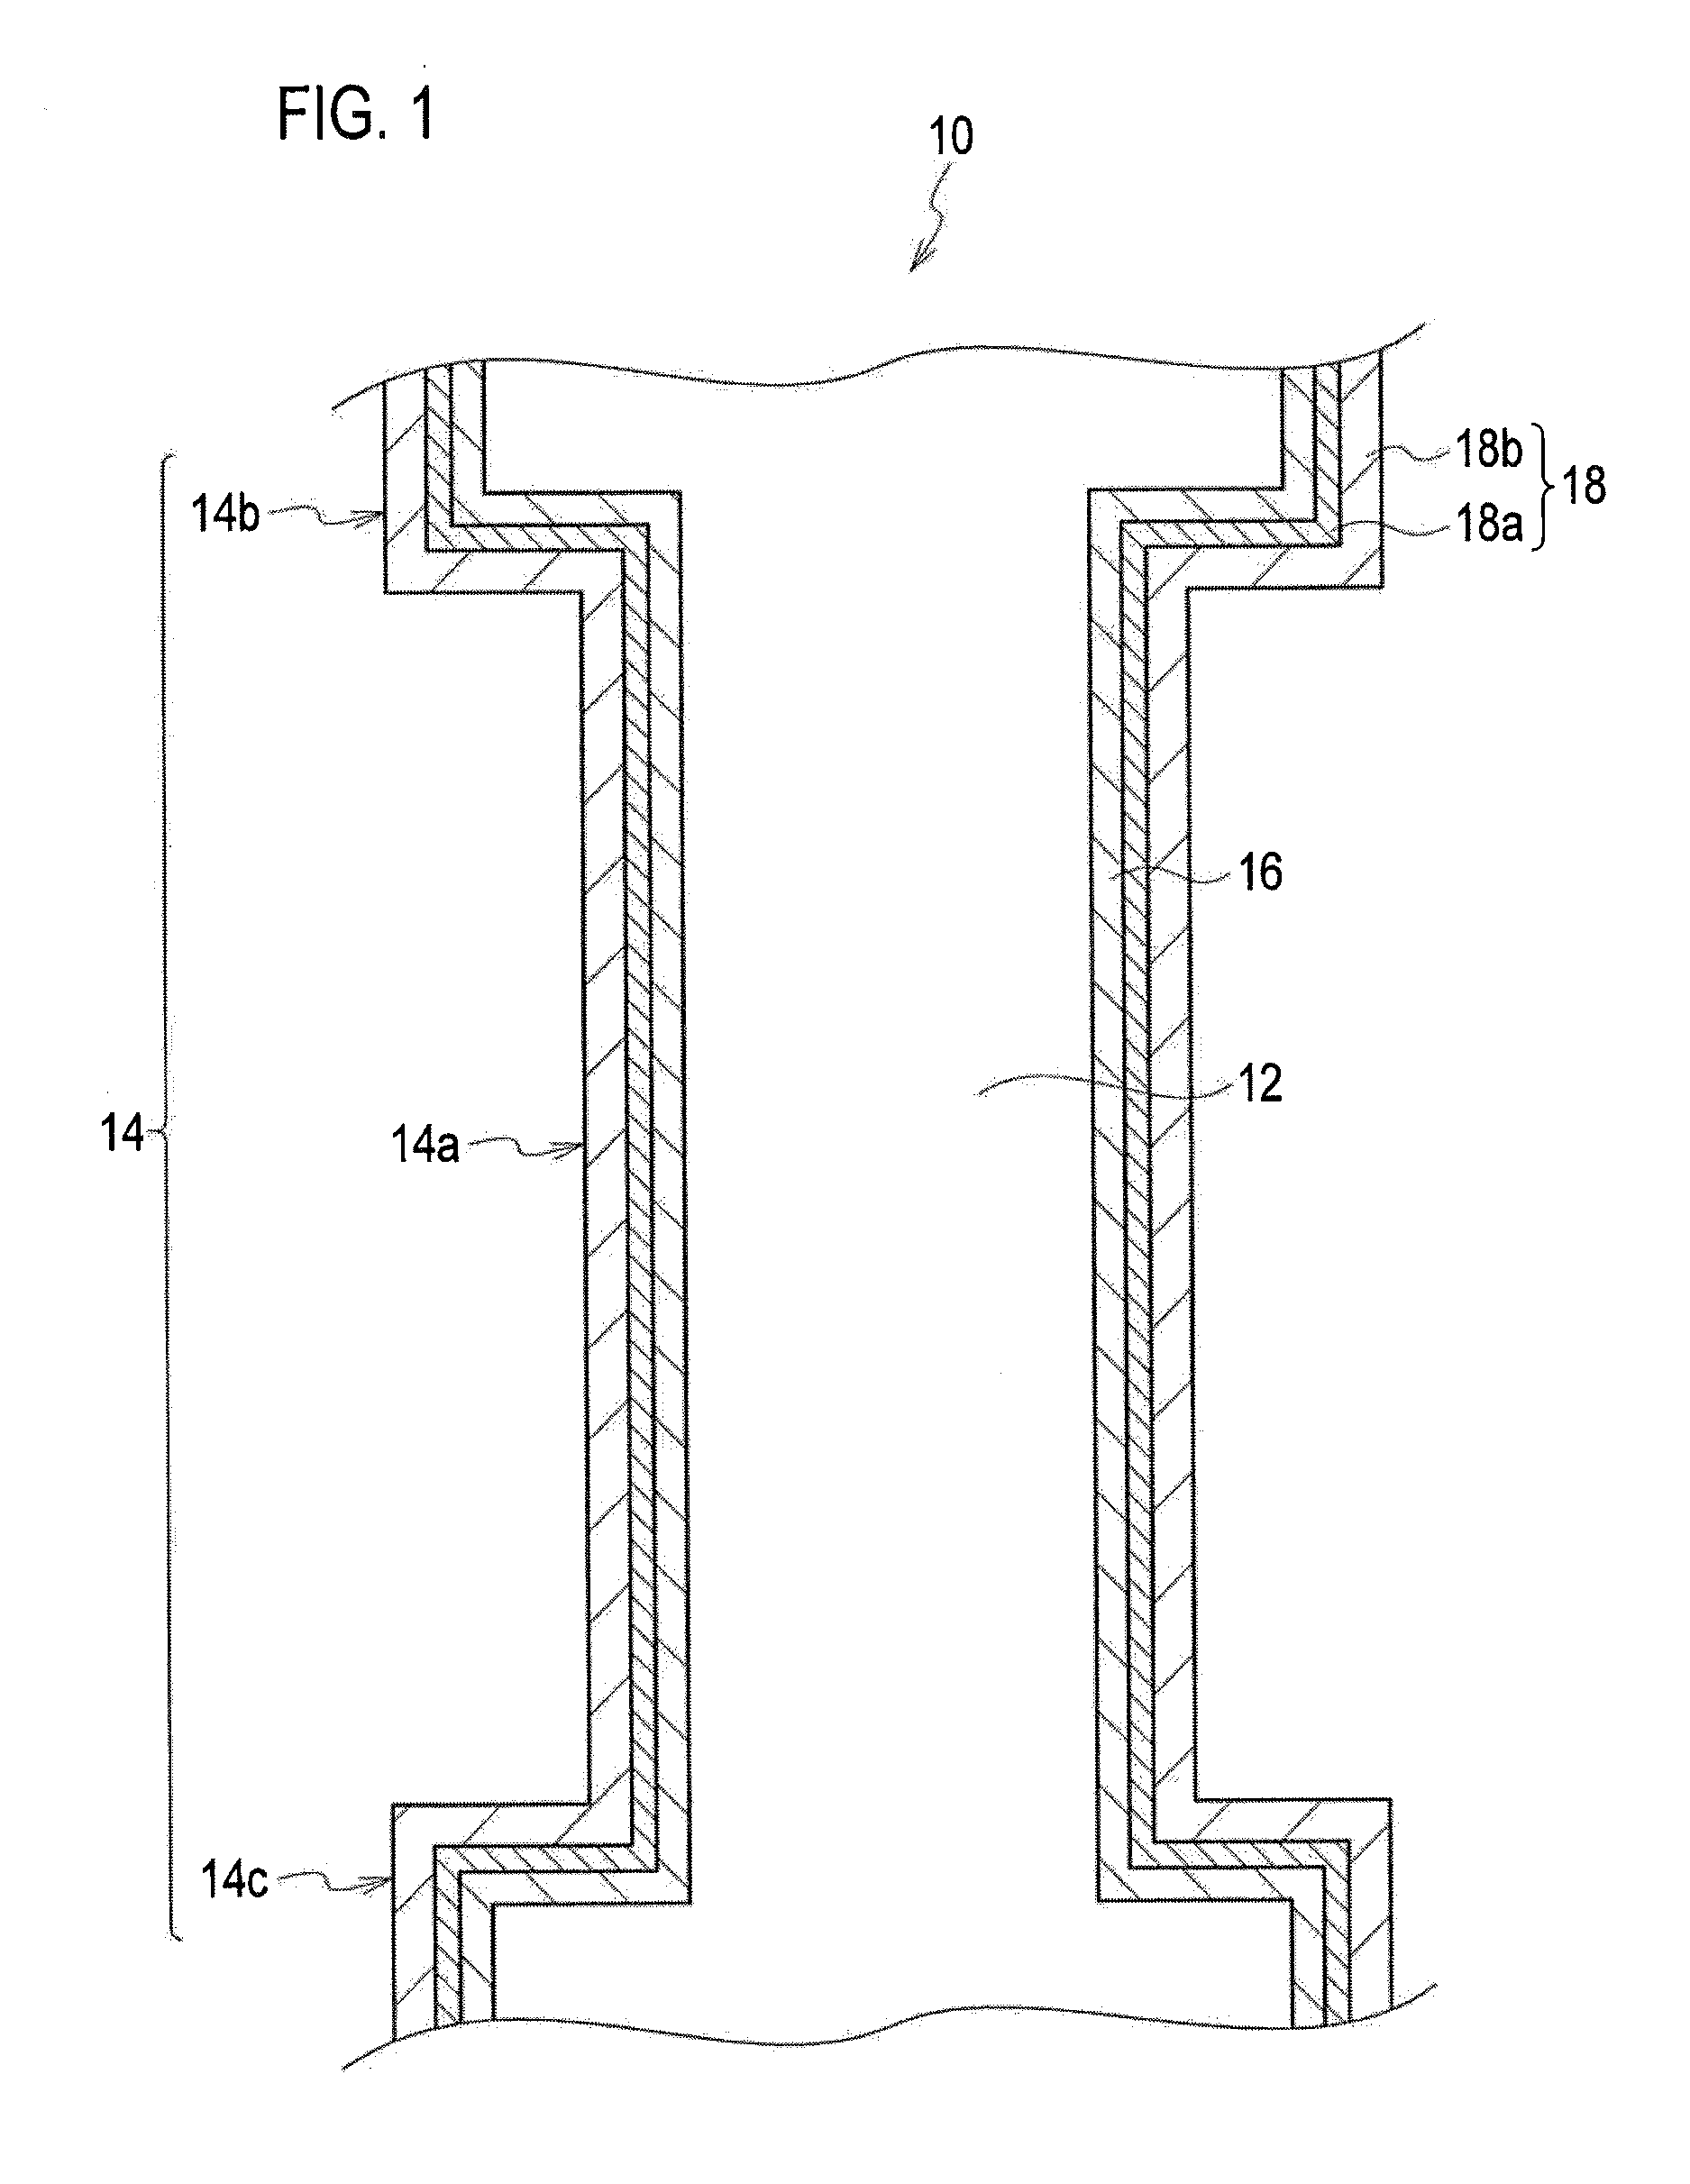 CASTING MOLD, METHOD OF MANUFACTURING SAME, TiAl ALLOY CAST PRODUCT, AND METHOD OF CASTING SAME